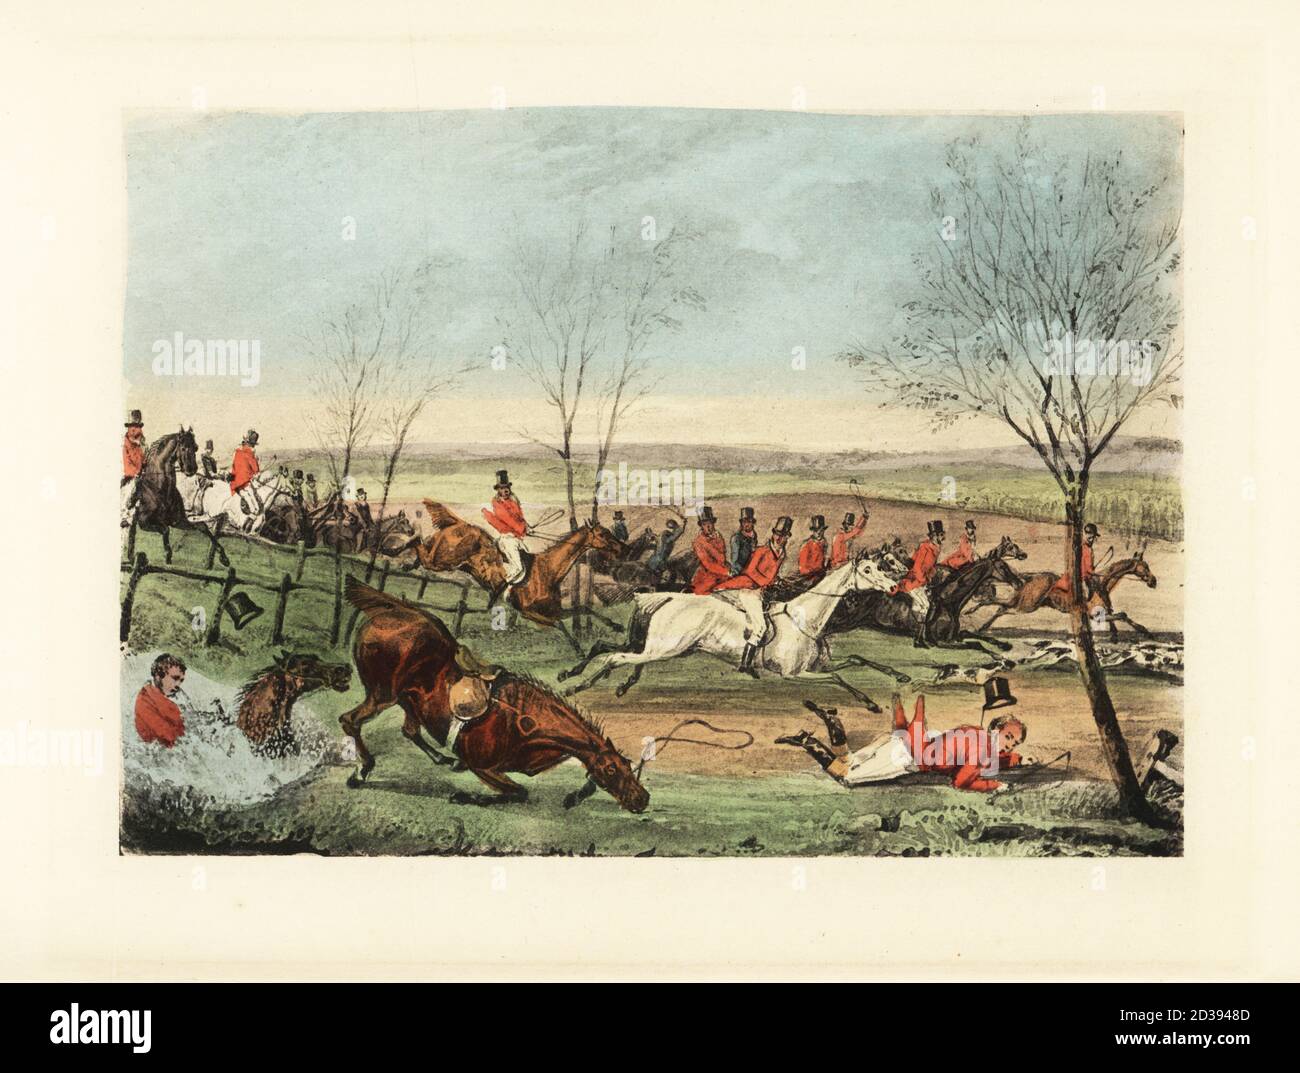 English gentleman falling at a ha-ha or sunken fence during a fox hunt. Mytton fell and was injured on Shavington Day, 7 April 1829. A squire-trap, by Jove, cries Mytton. A little more and I should have done it! Chromolithographic facsimile of an illustration by Henry Thomas Alken from Memoirs of the Life of the Late John Mytton by Nimrod aka Charles James Apperley, Kegan Paul, London, 1900. Stock Photo